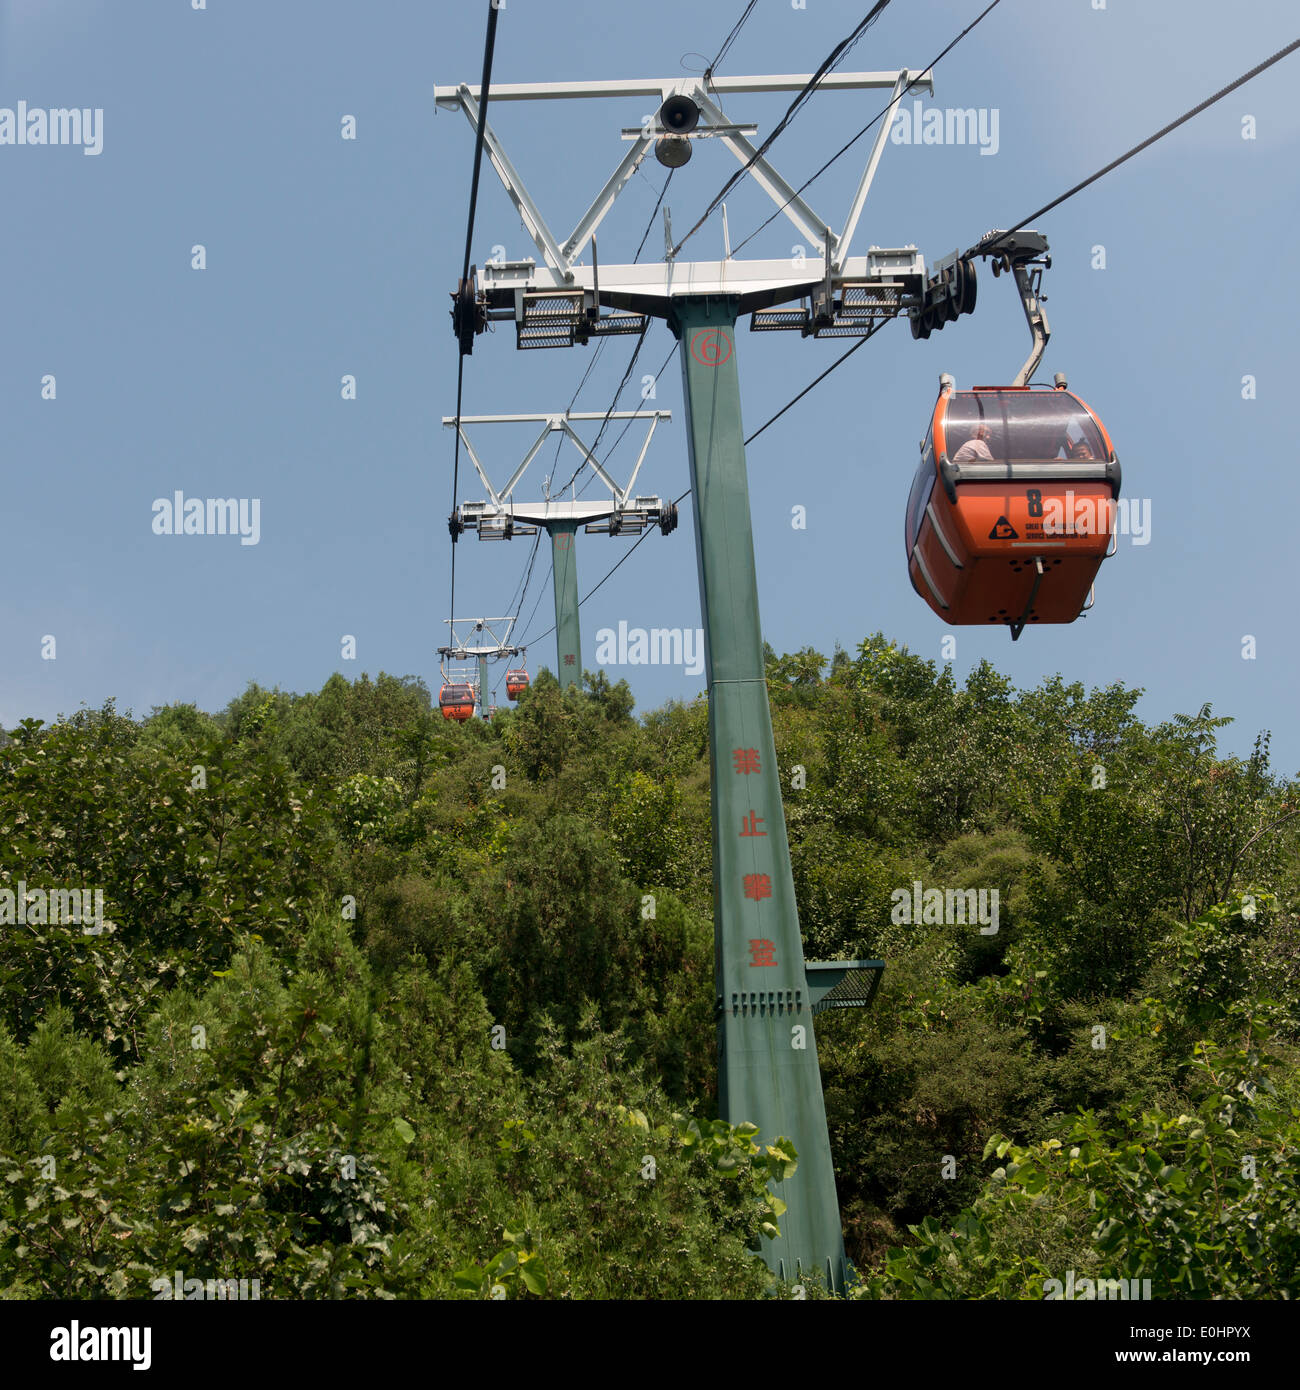 Overhead cable car at the Mutianyu section of Great Wall Of China, Huairou District, Beijing, China Stock Photo